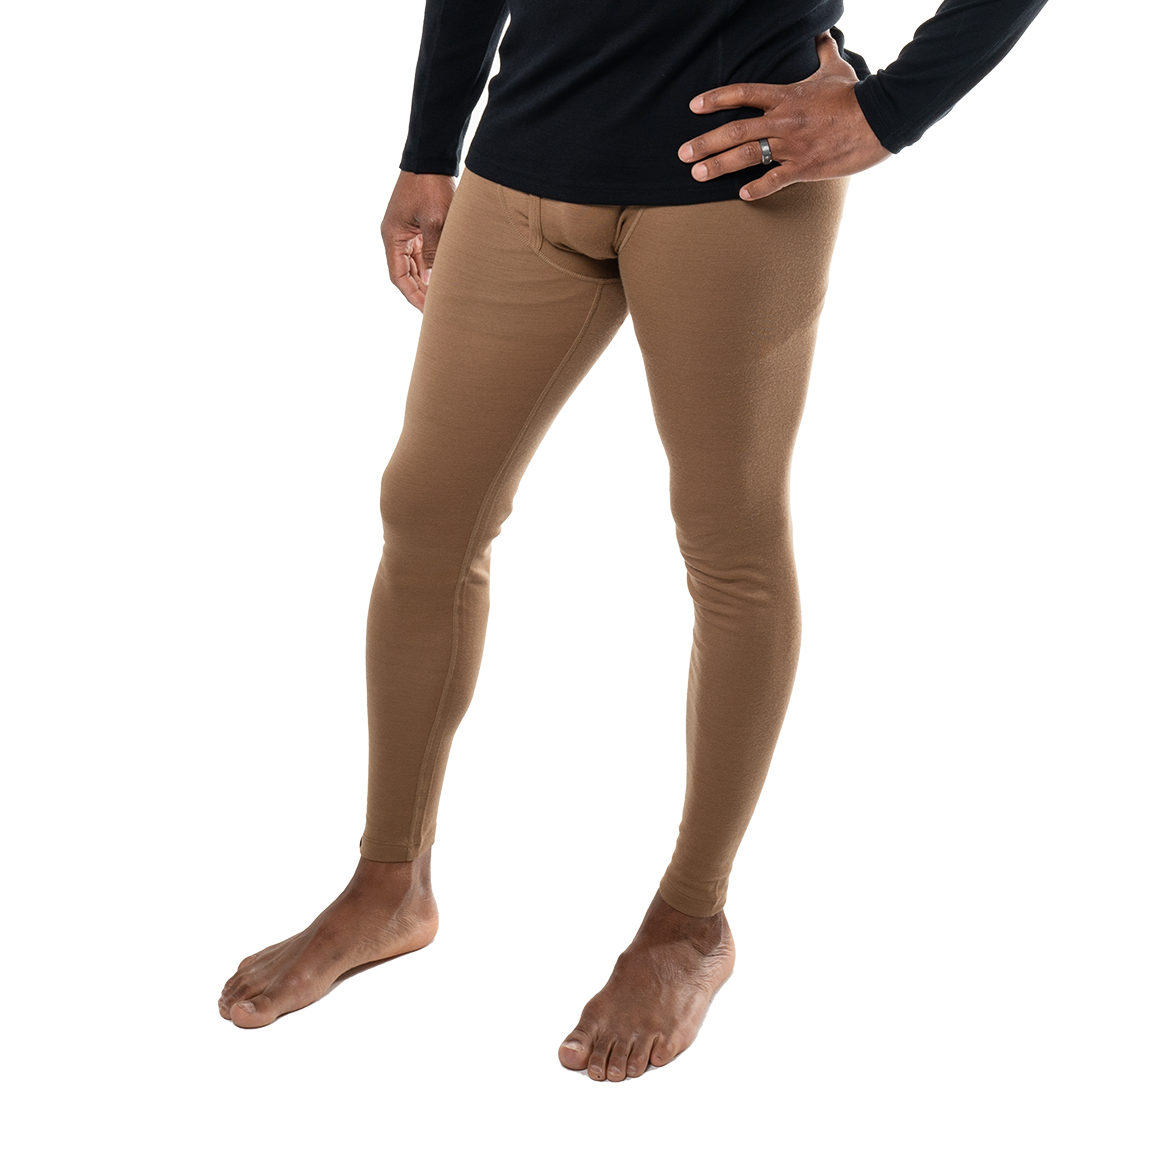 Men's Base Layer Mid-Weight Bottoms